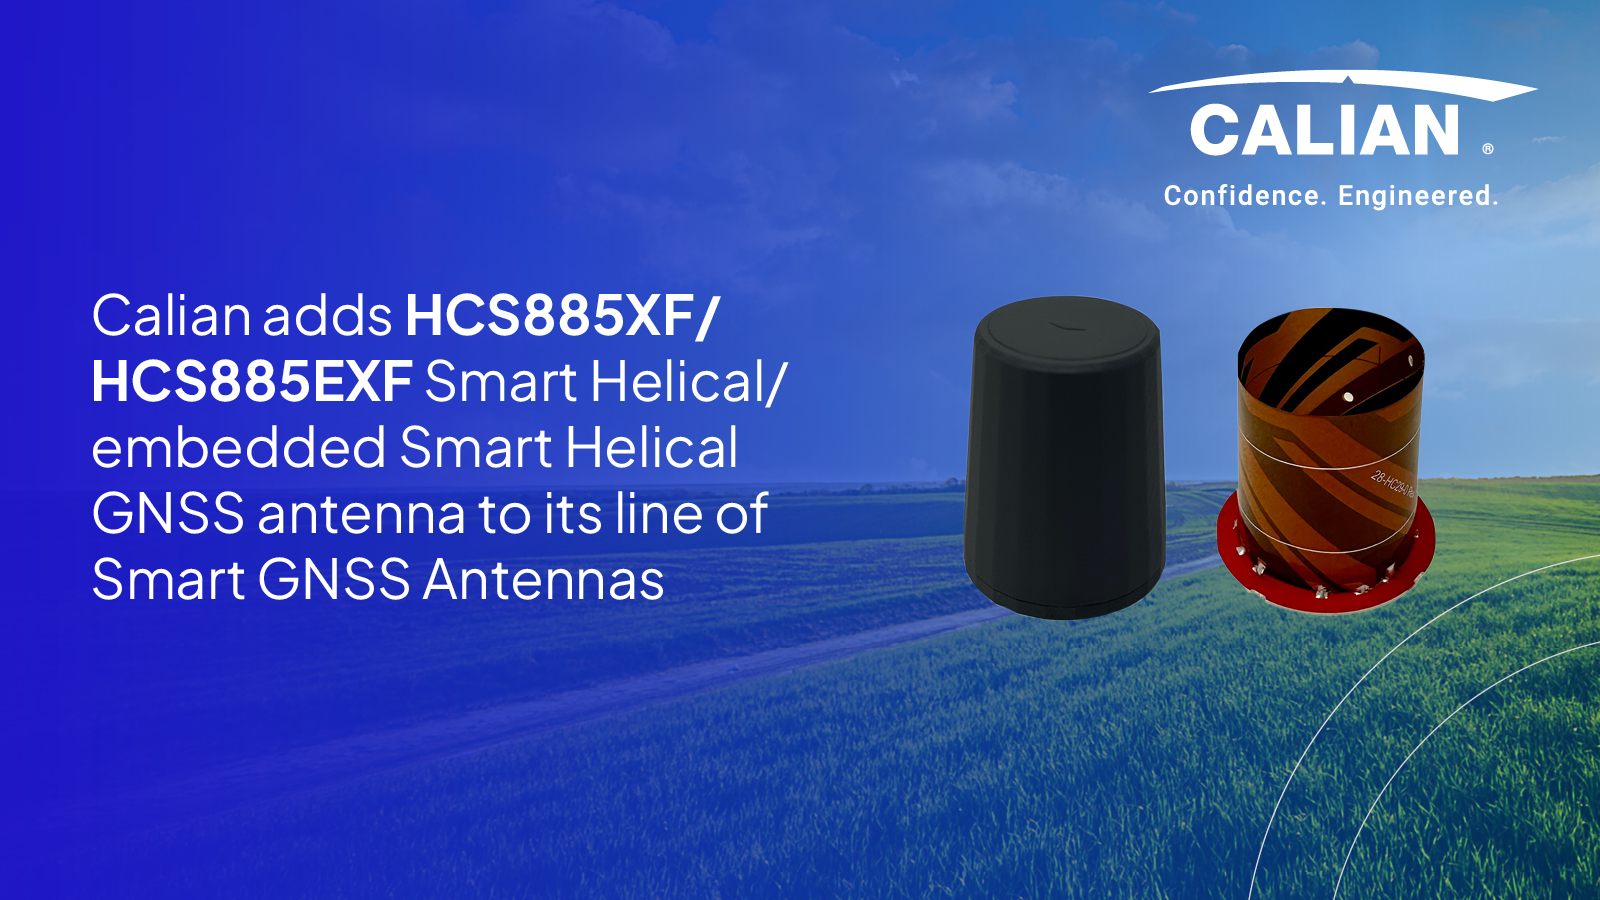 Calian adds HCS885XF/HCS885EXF Smart Helical/embedded Smart Helical GNSS antenna to its line of Smart GNSS Antennas